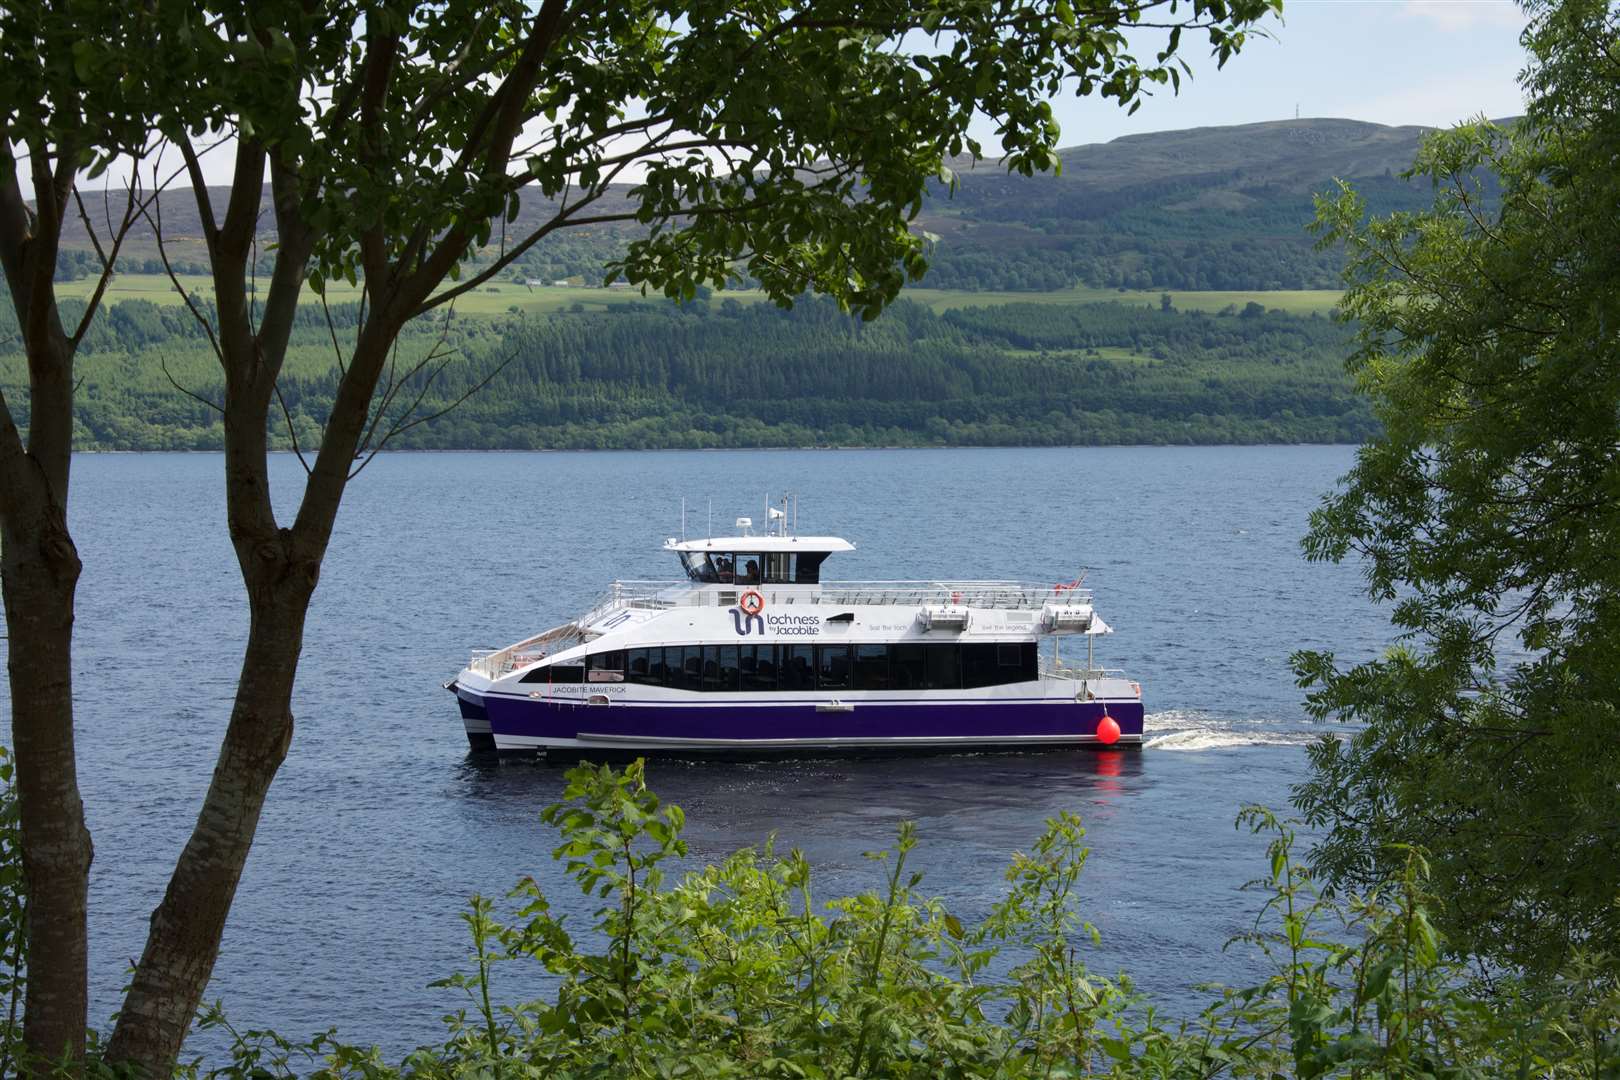 Loch Ness by Jacobite cruise boat.